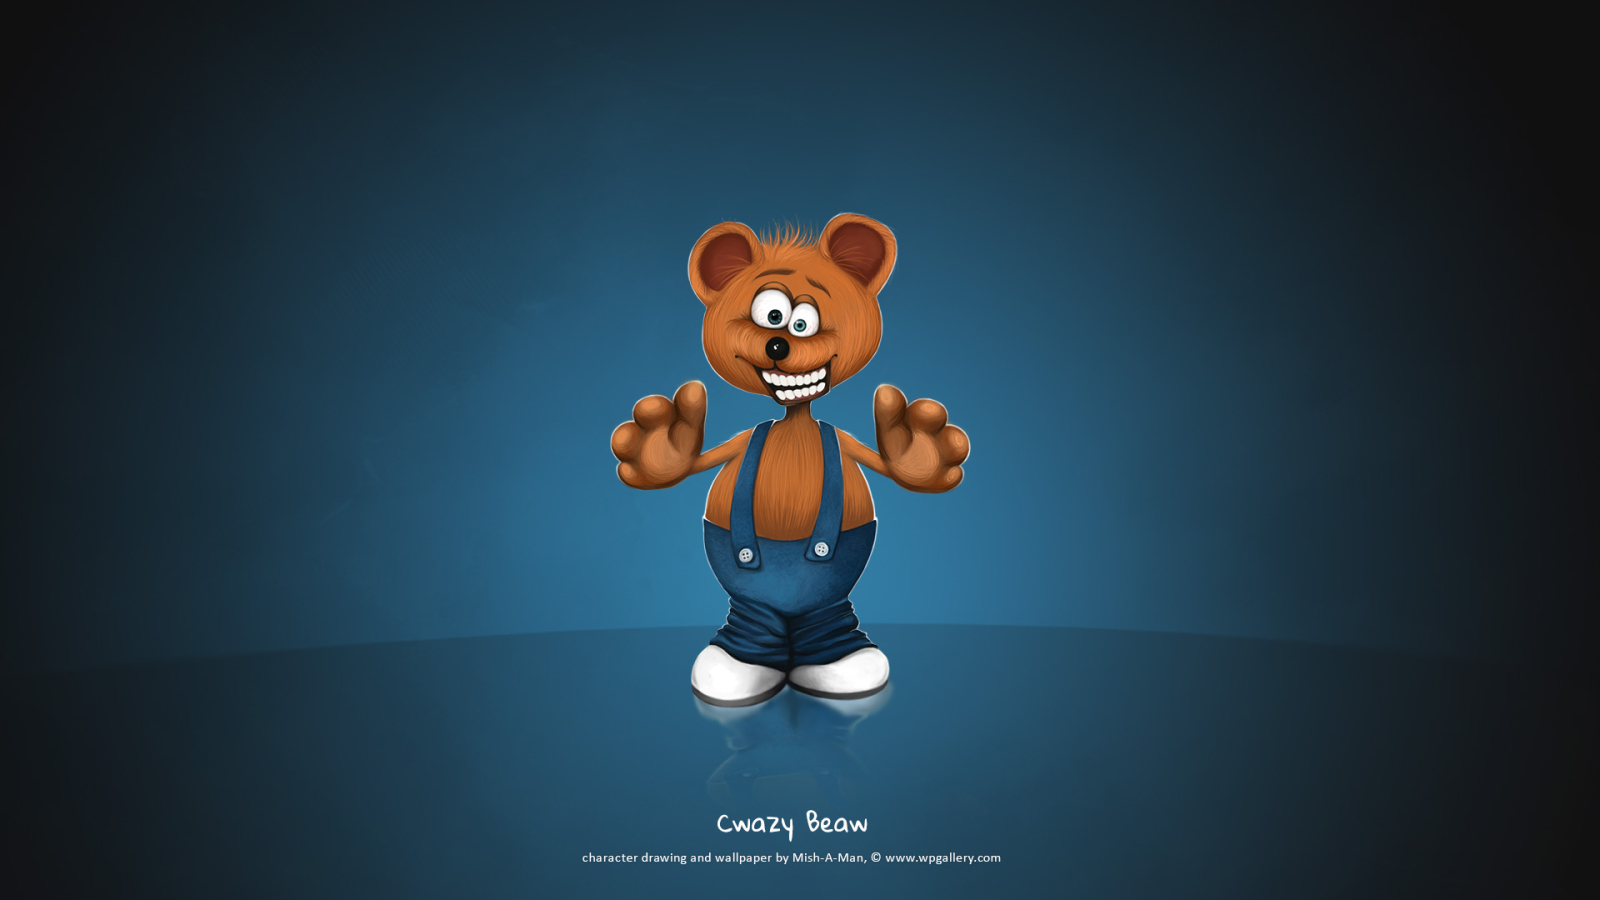 Cwazy Beaw for 1600 x 900 HDTV resolution